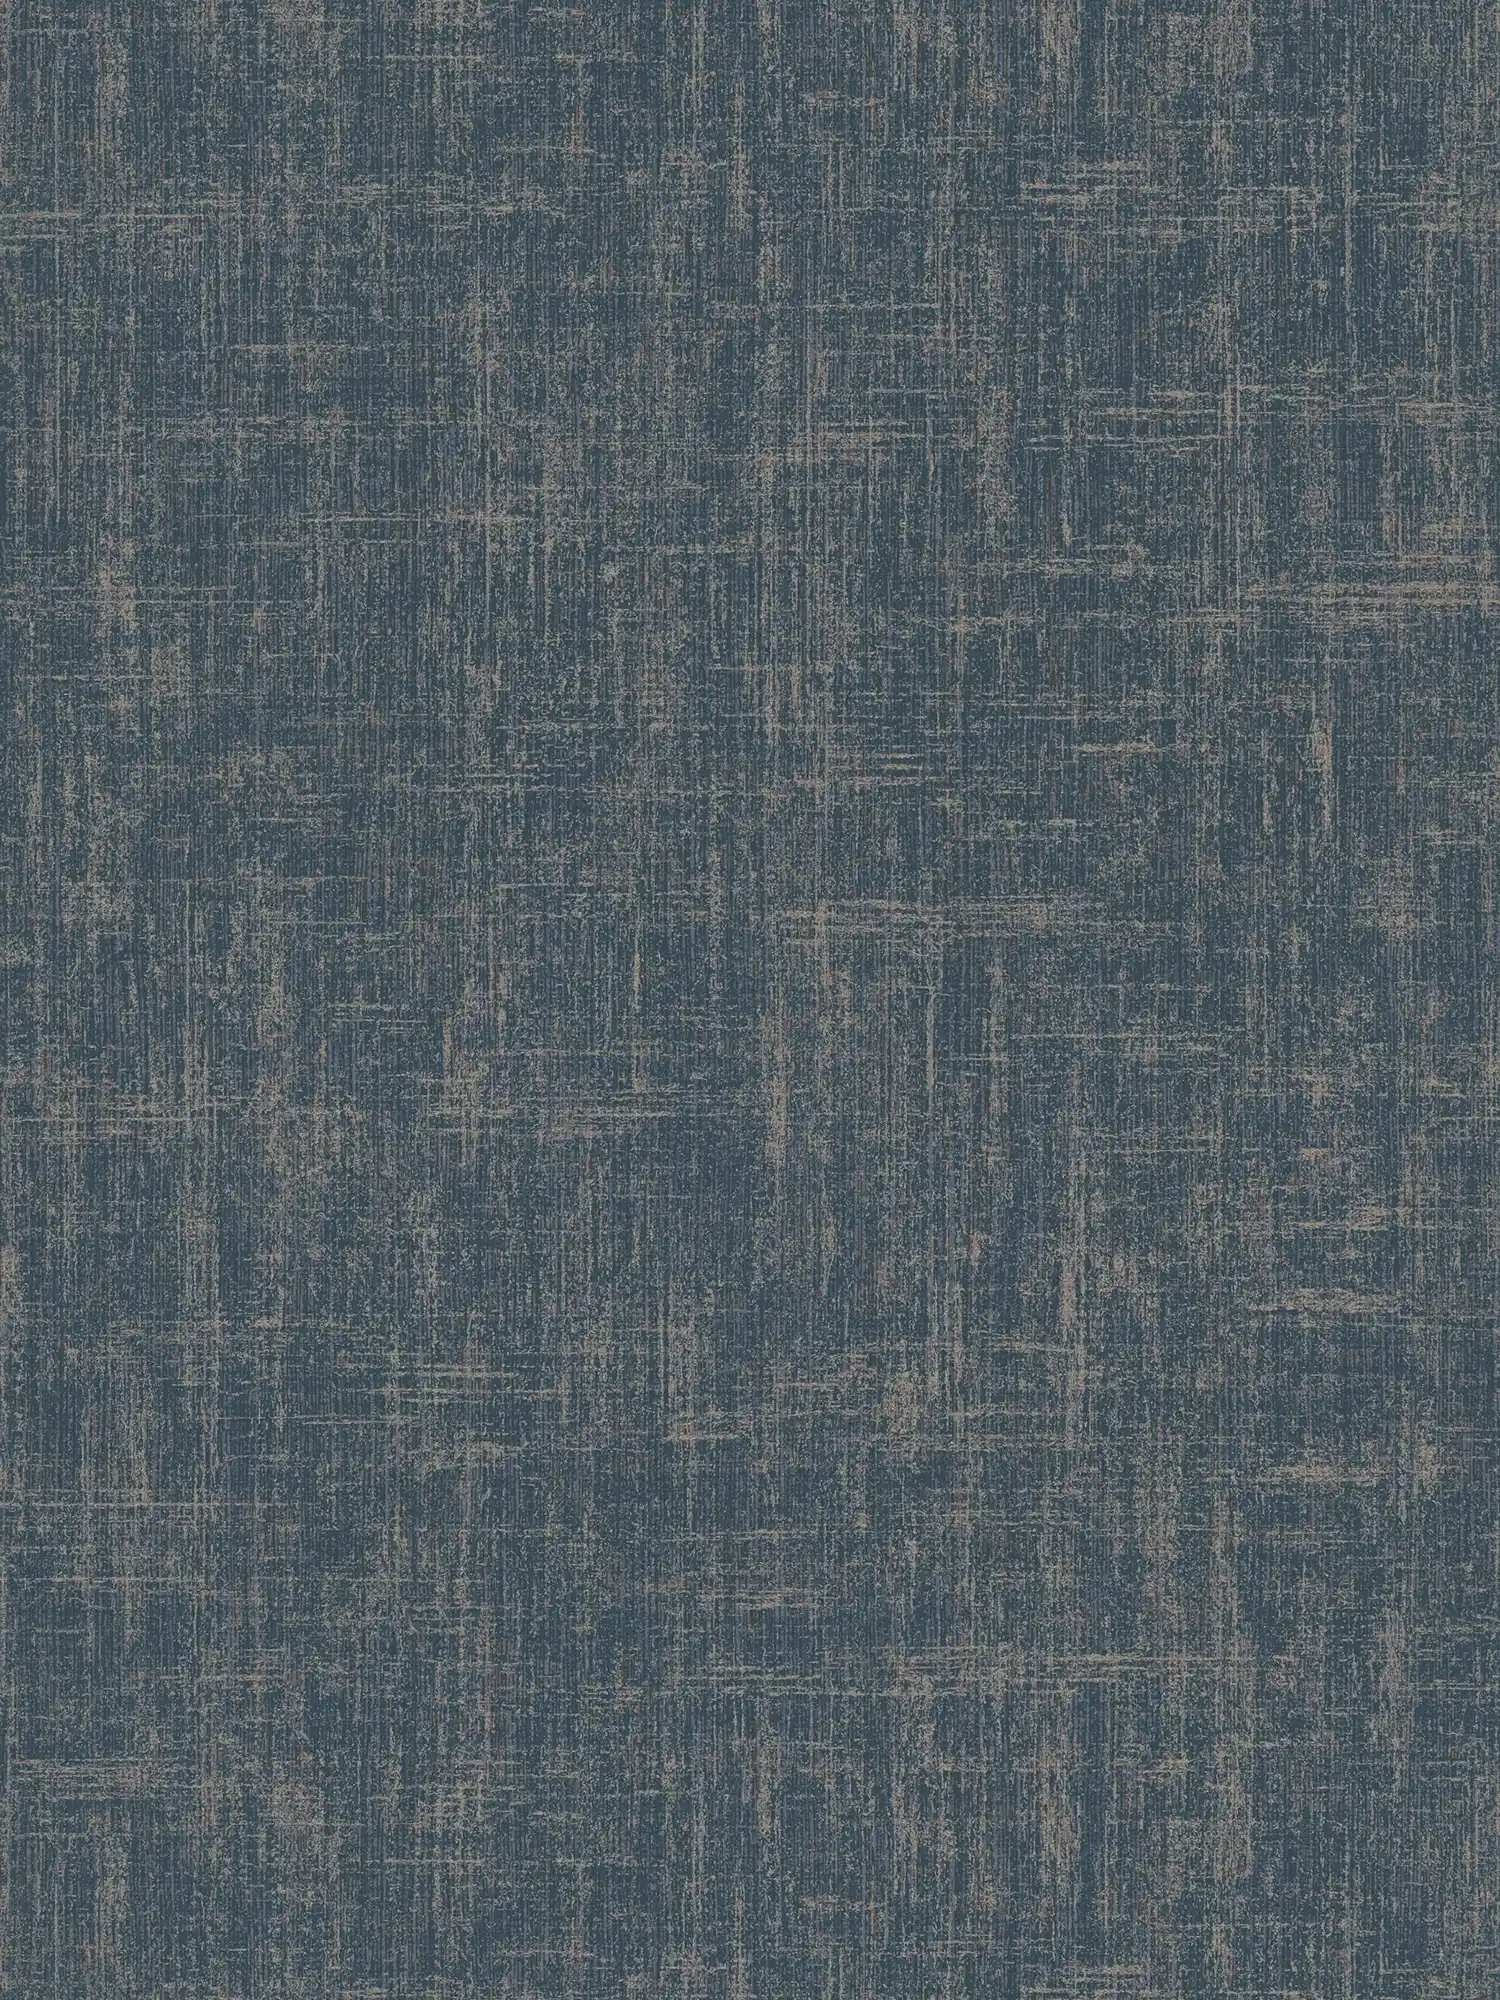 Navy blue wallpaper with metallic accent - blue
